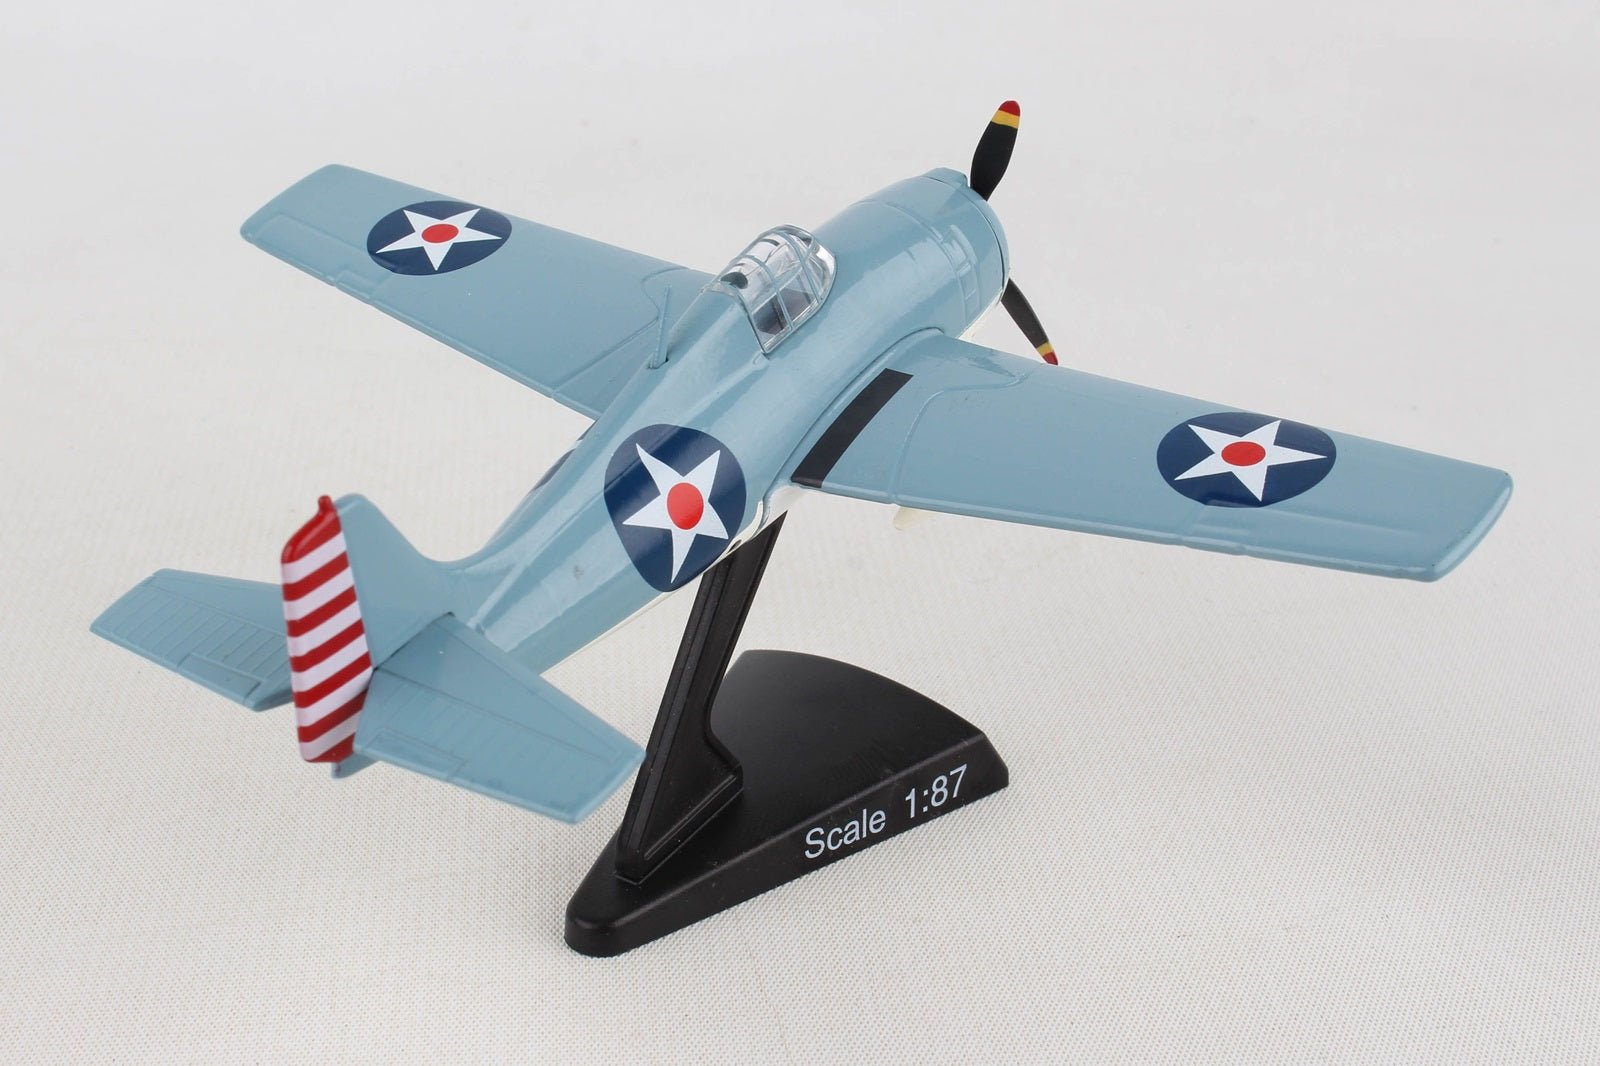 Daron® "Postage Stamp" F4F Wildcat® Diecast Collectible Airplane, 1/87 Scale